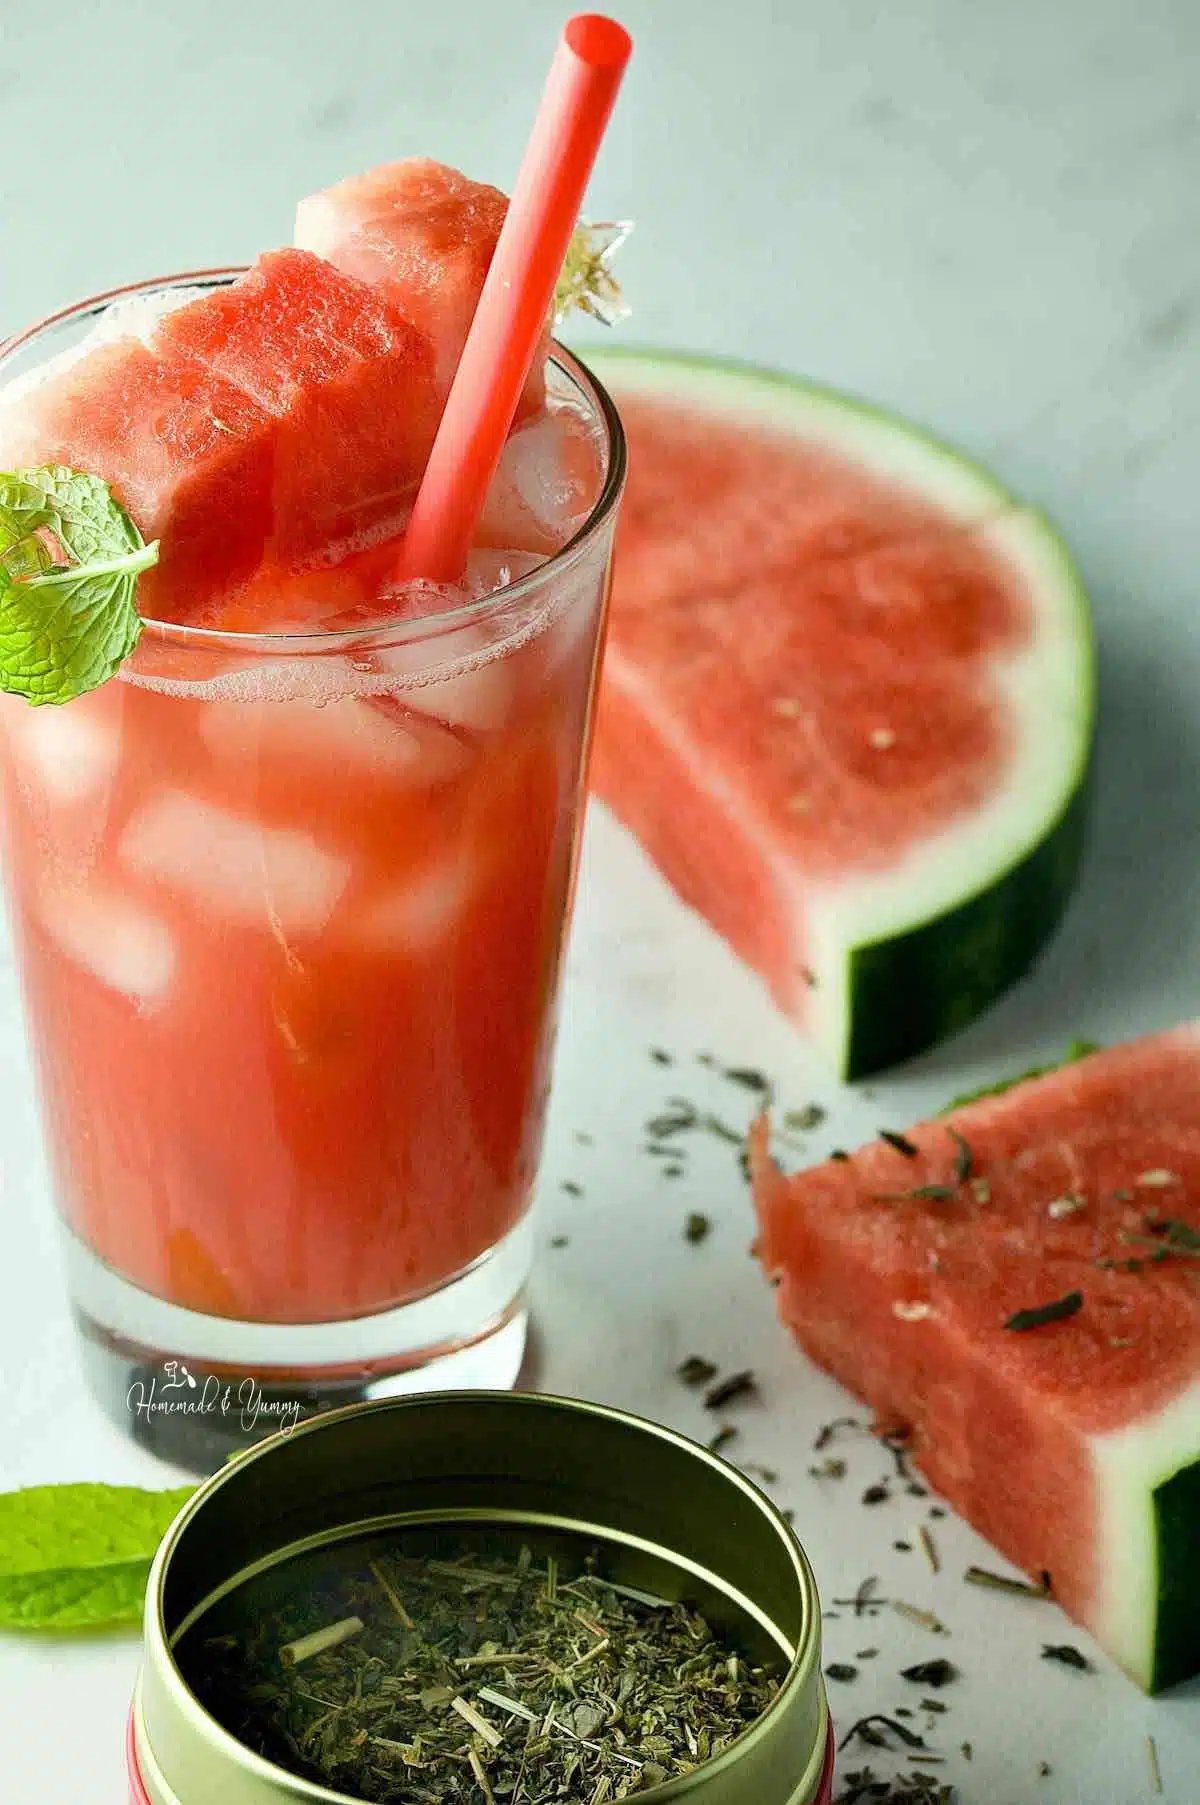 Watermelon juice blended with mint tea.